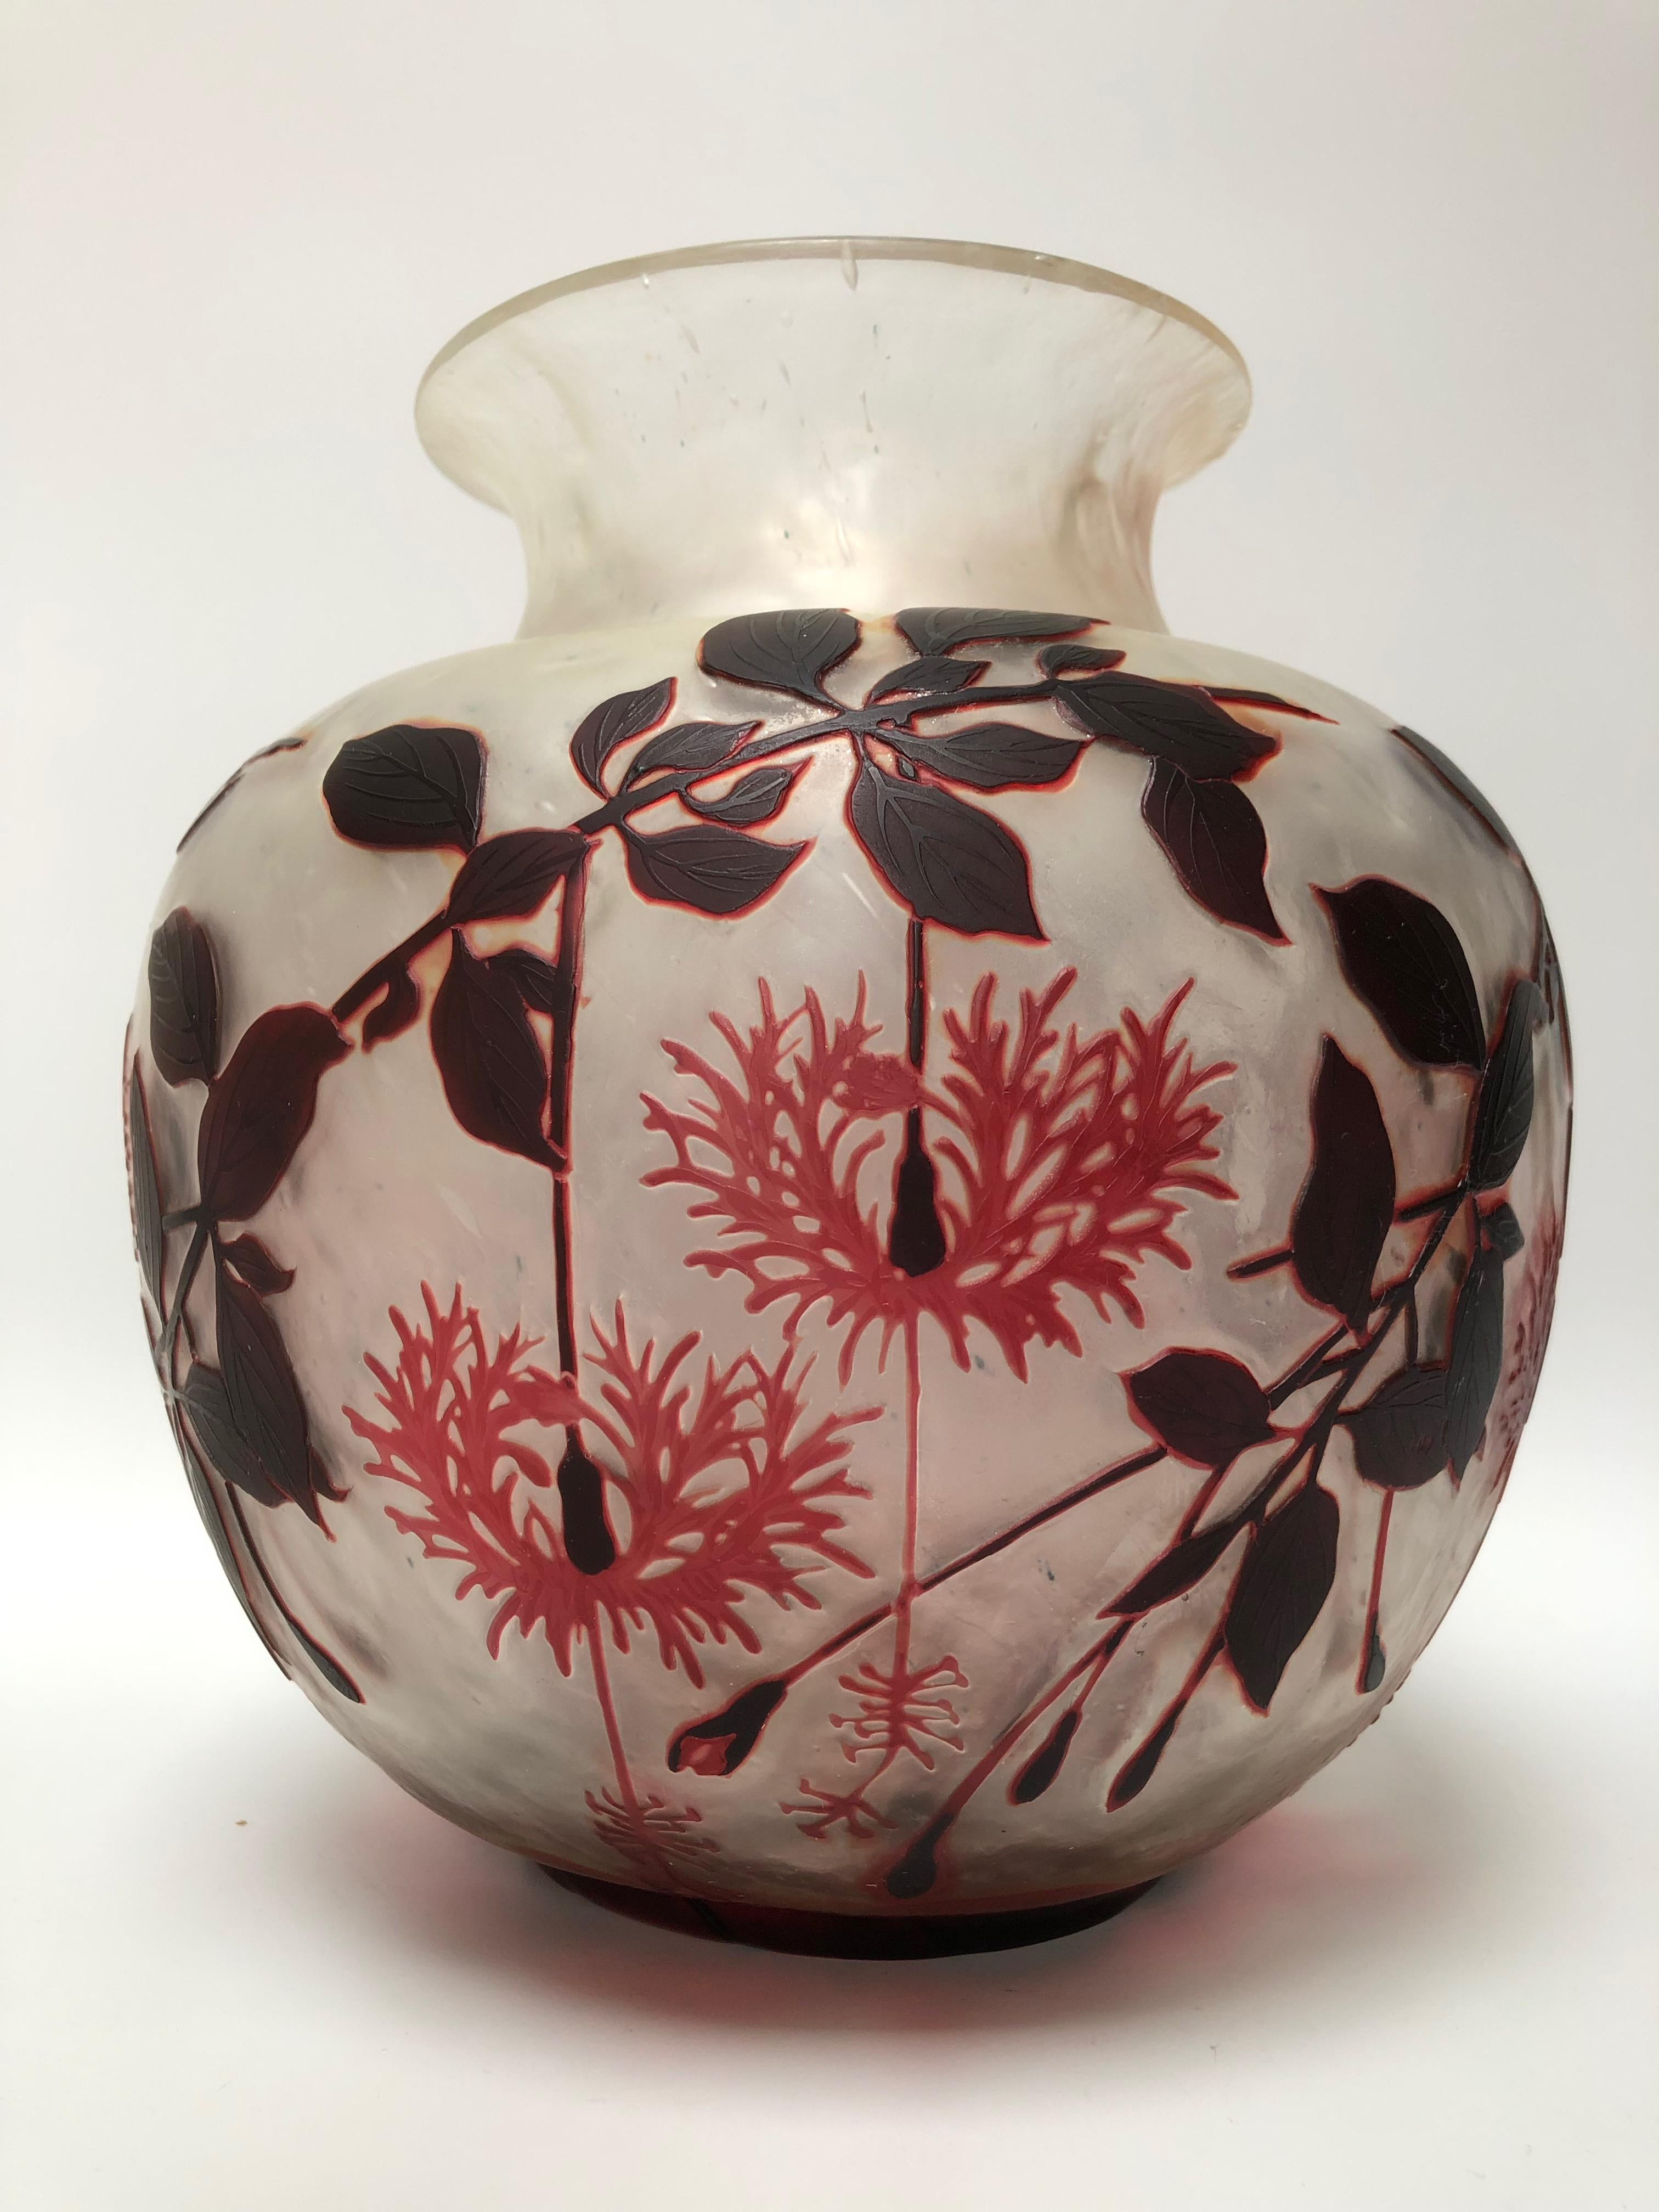 Art Nouveau vase around 1910. In perfect condition. Decorated with chrisenthems.
Rose-colored leaves, buds, and flower clusters executed in two layers on colorless ground, signed on base Cristallerie de Pantin.
In perfect condition.
Total height: